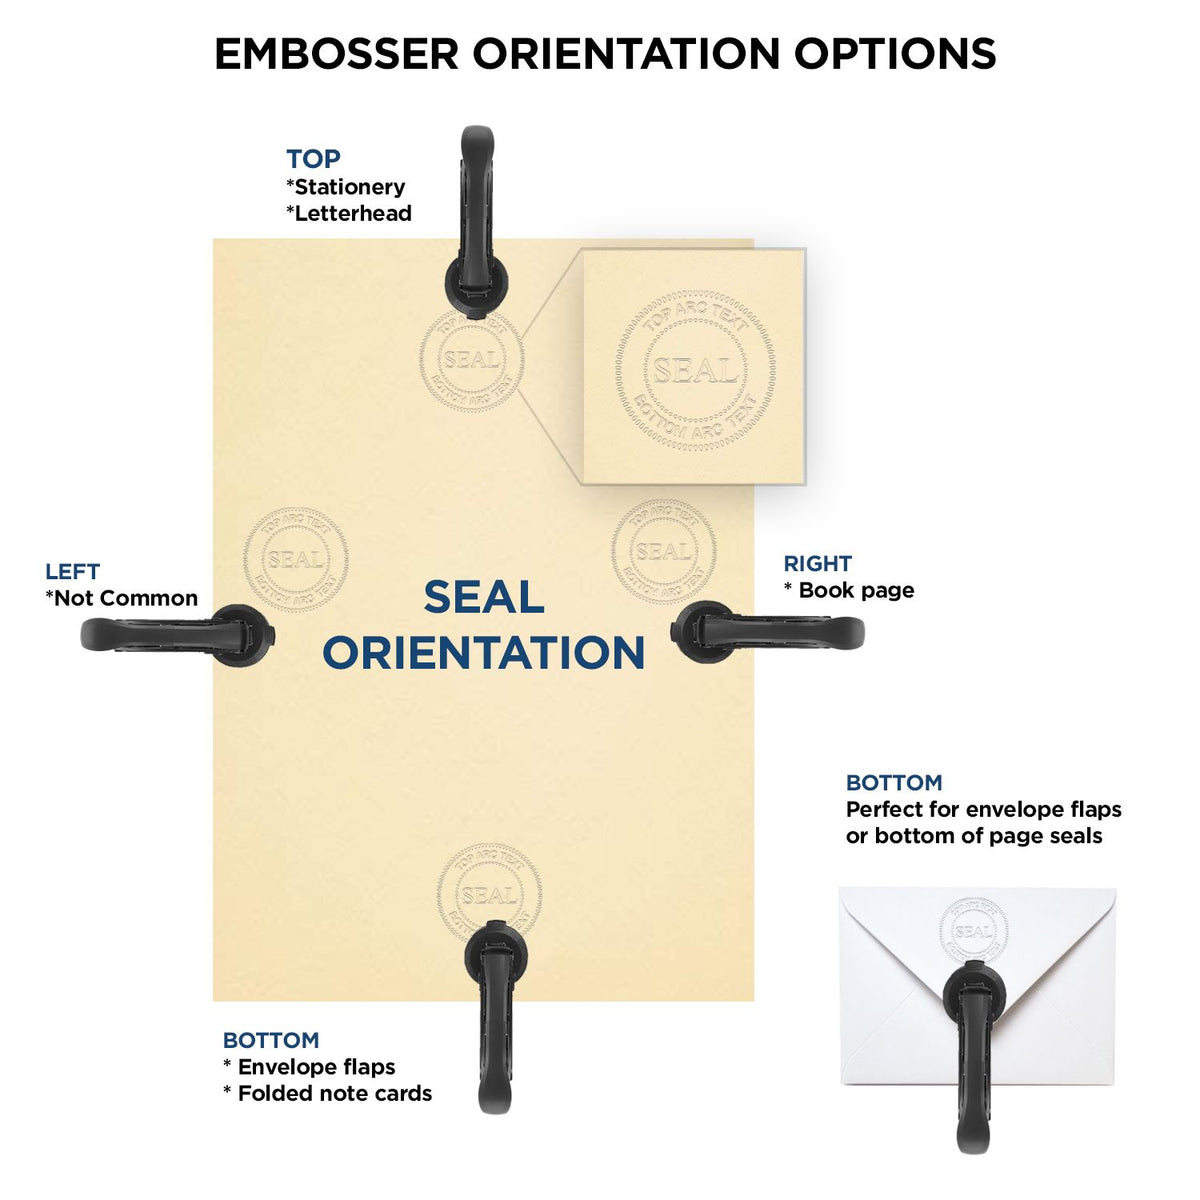 An infographic for the Handheld New Jersey Architect Seal Embosser showing embosser orientation, this is showing examples of a top, bottom, right and left insert.